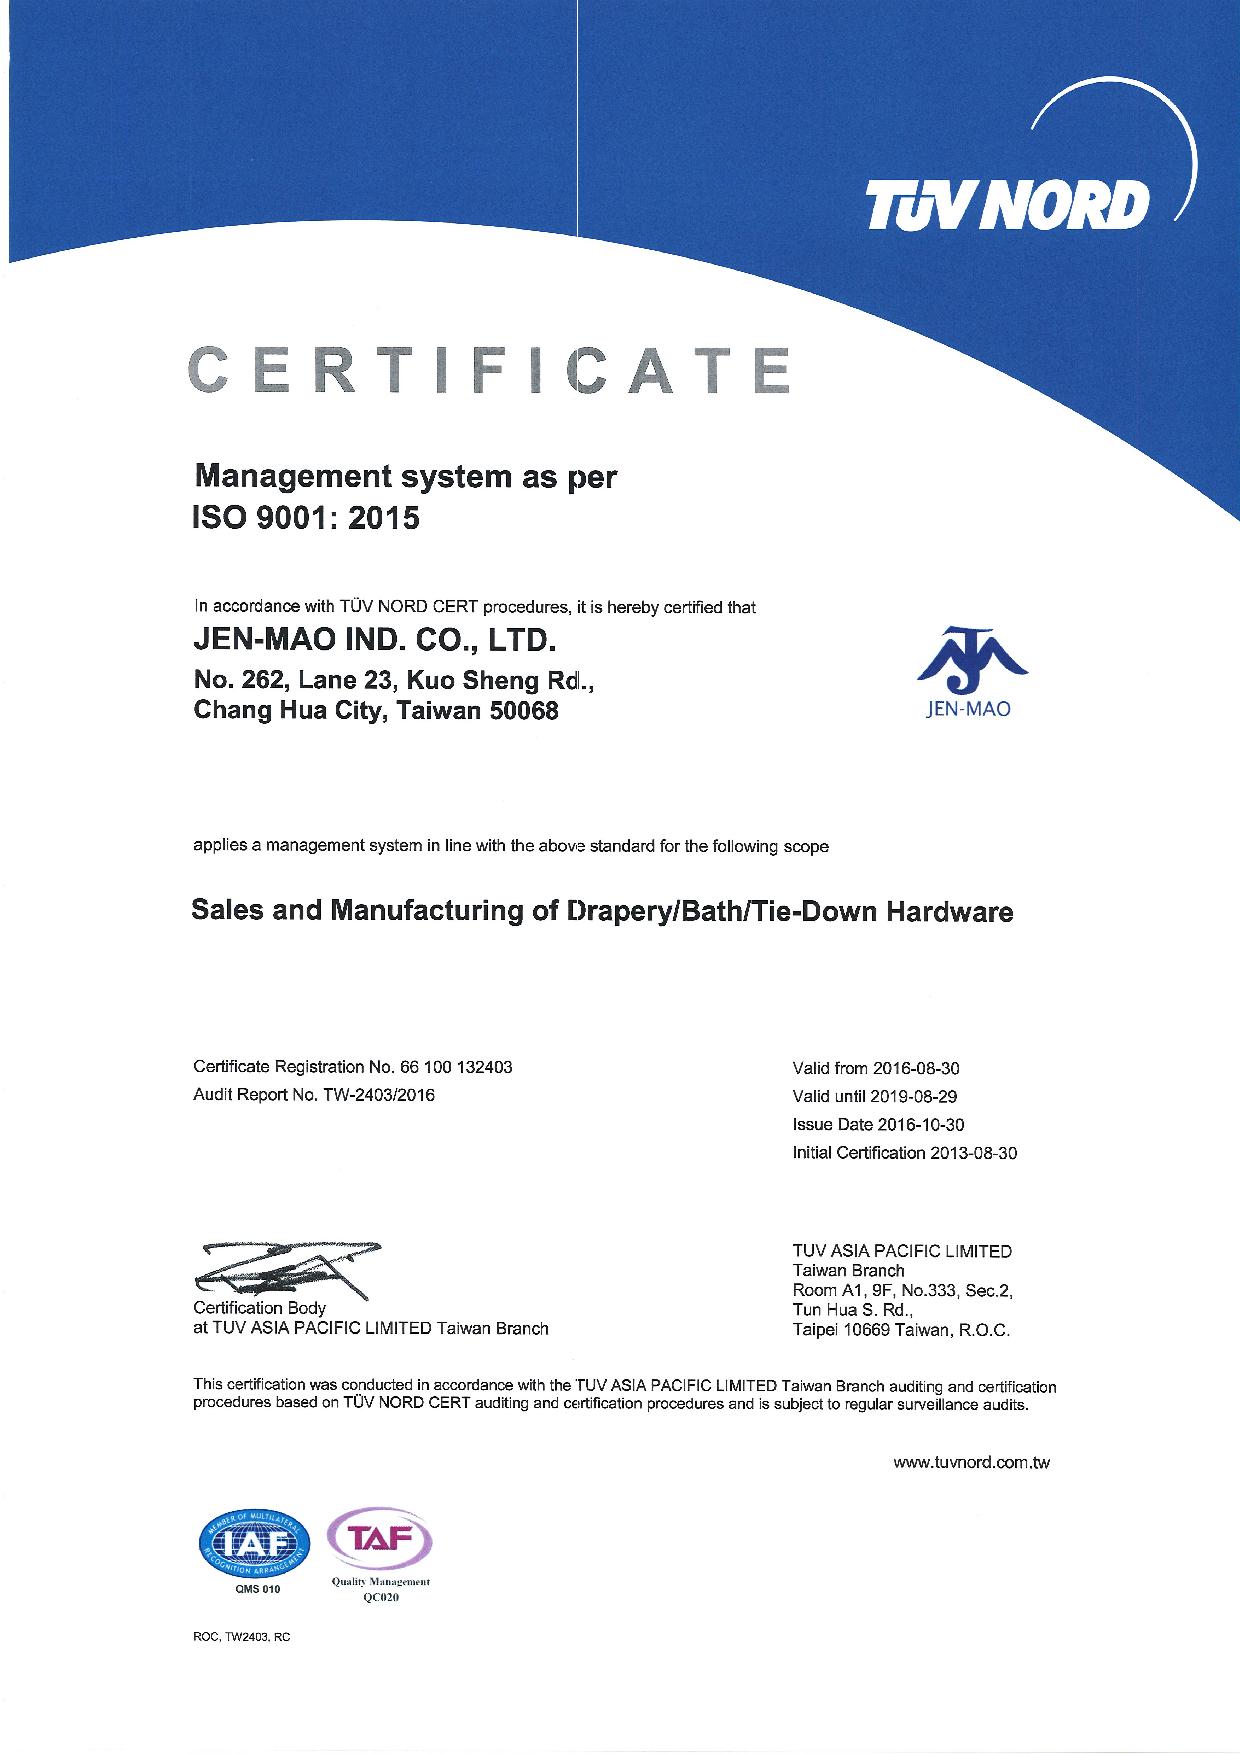 Quality Policy - ISO 9001:2015 Certificate